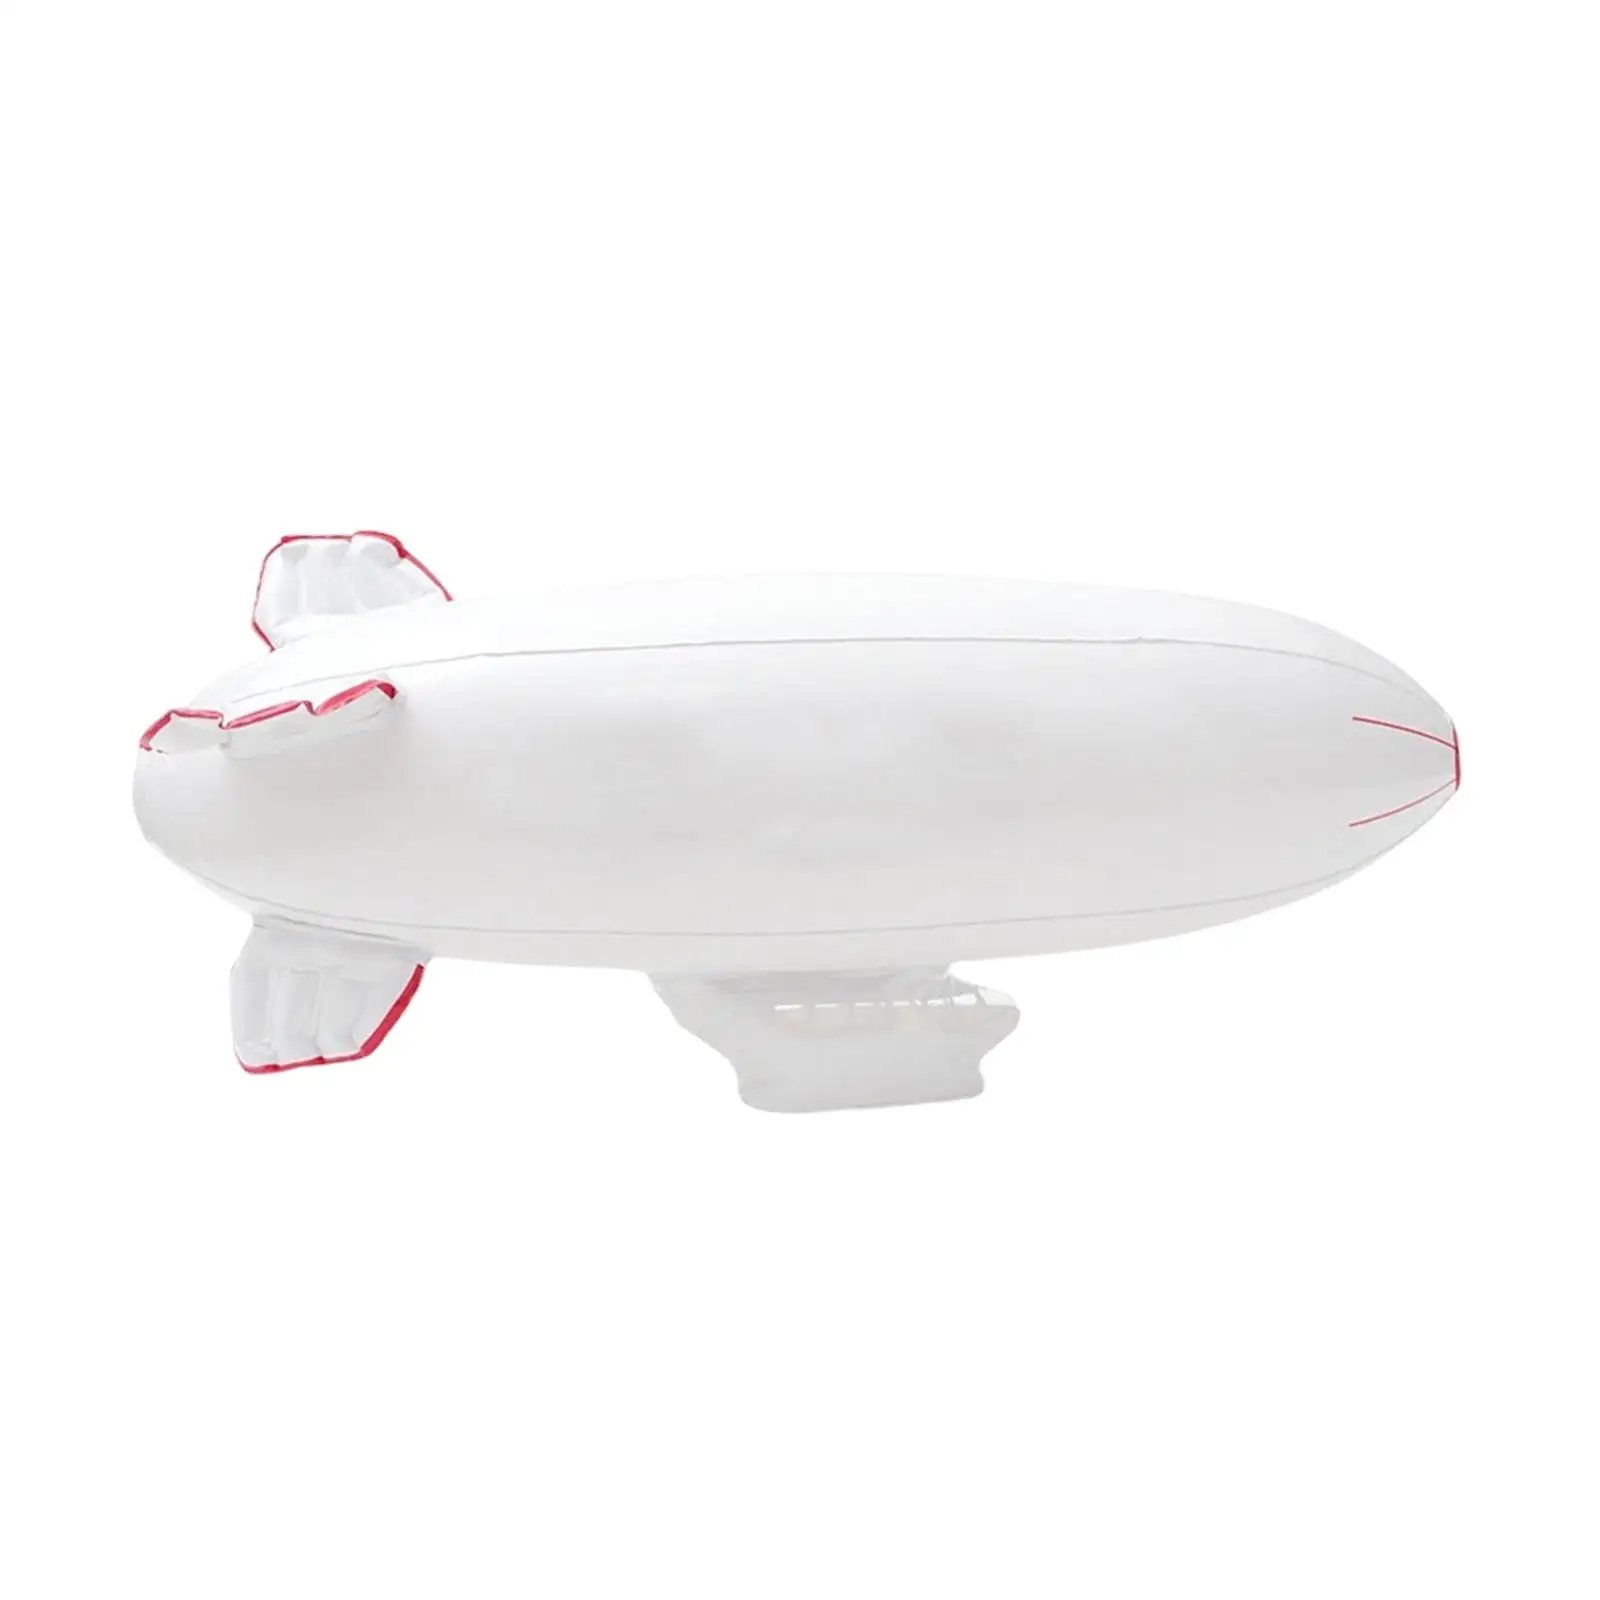 Nflatable Toy Tenacity Small Size Aerodynamic Design Soft Reusable Airplane Model Spaceship Model for Party Wedding Ornaments